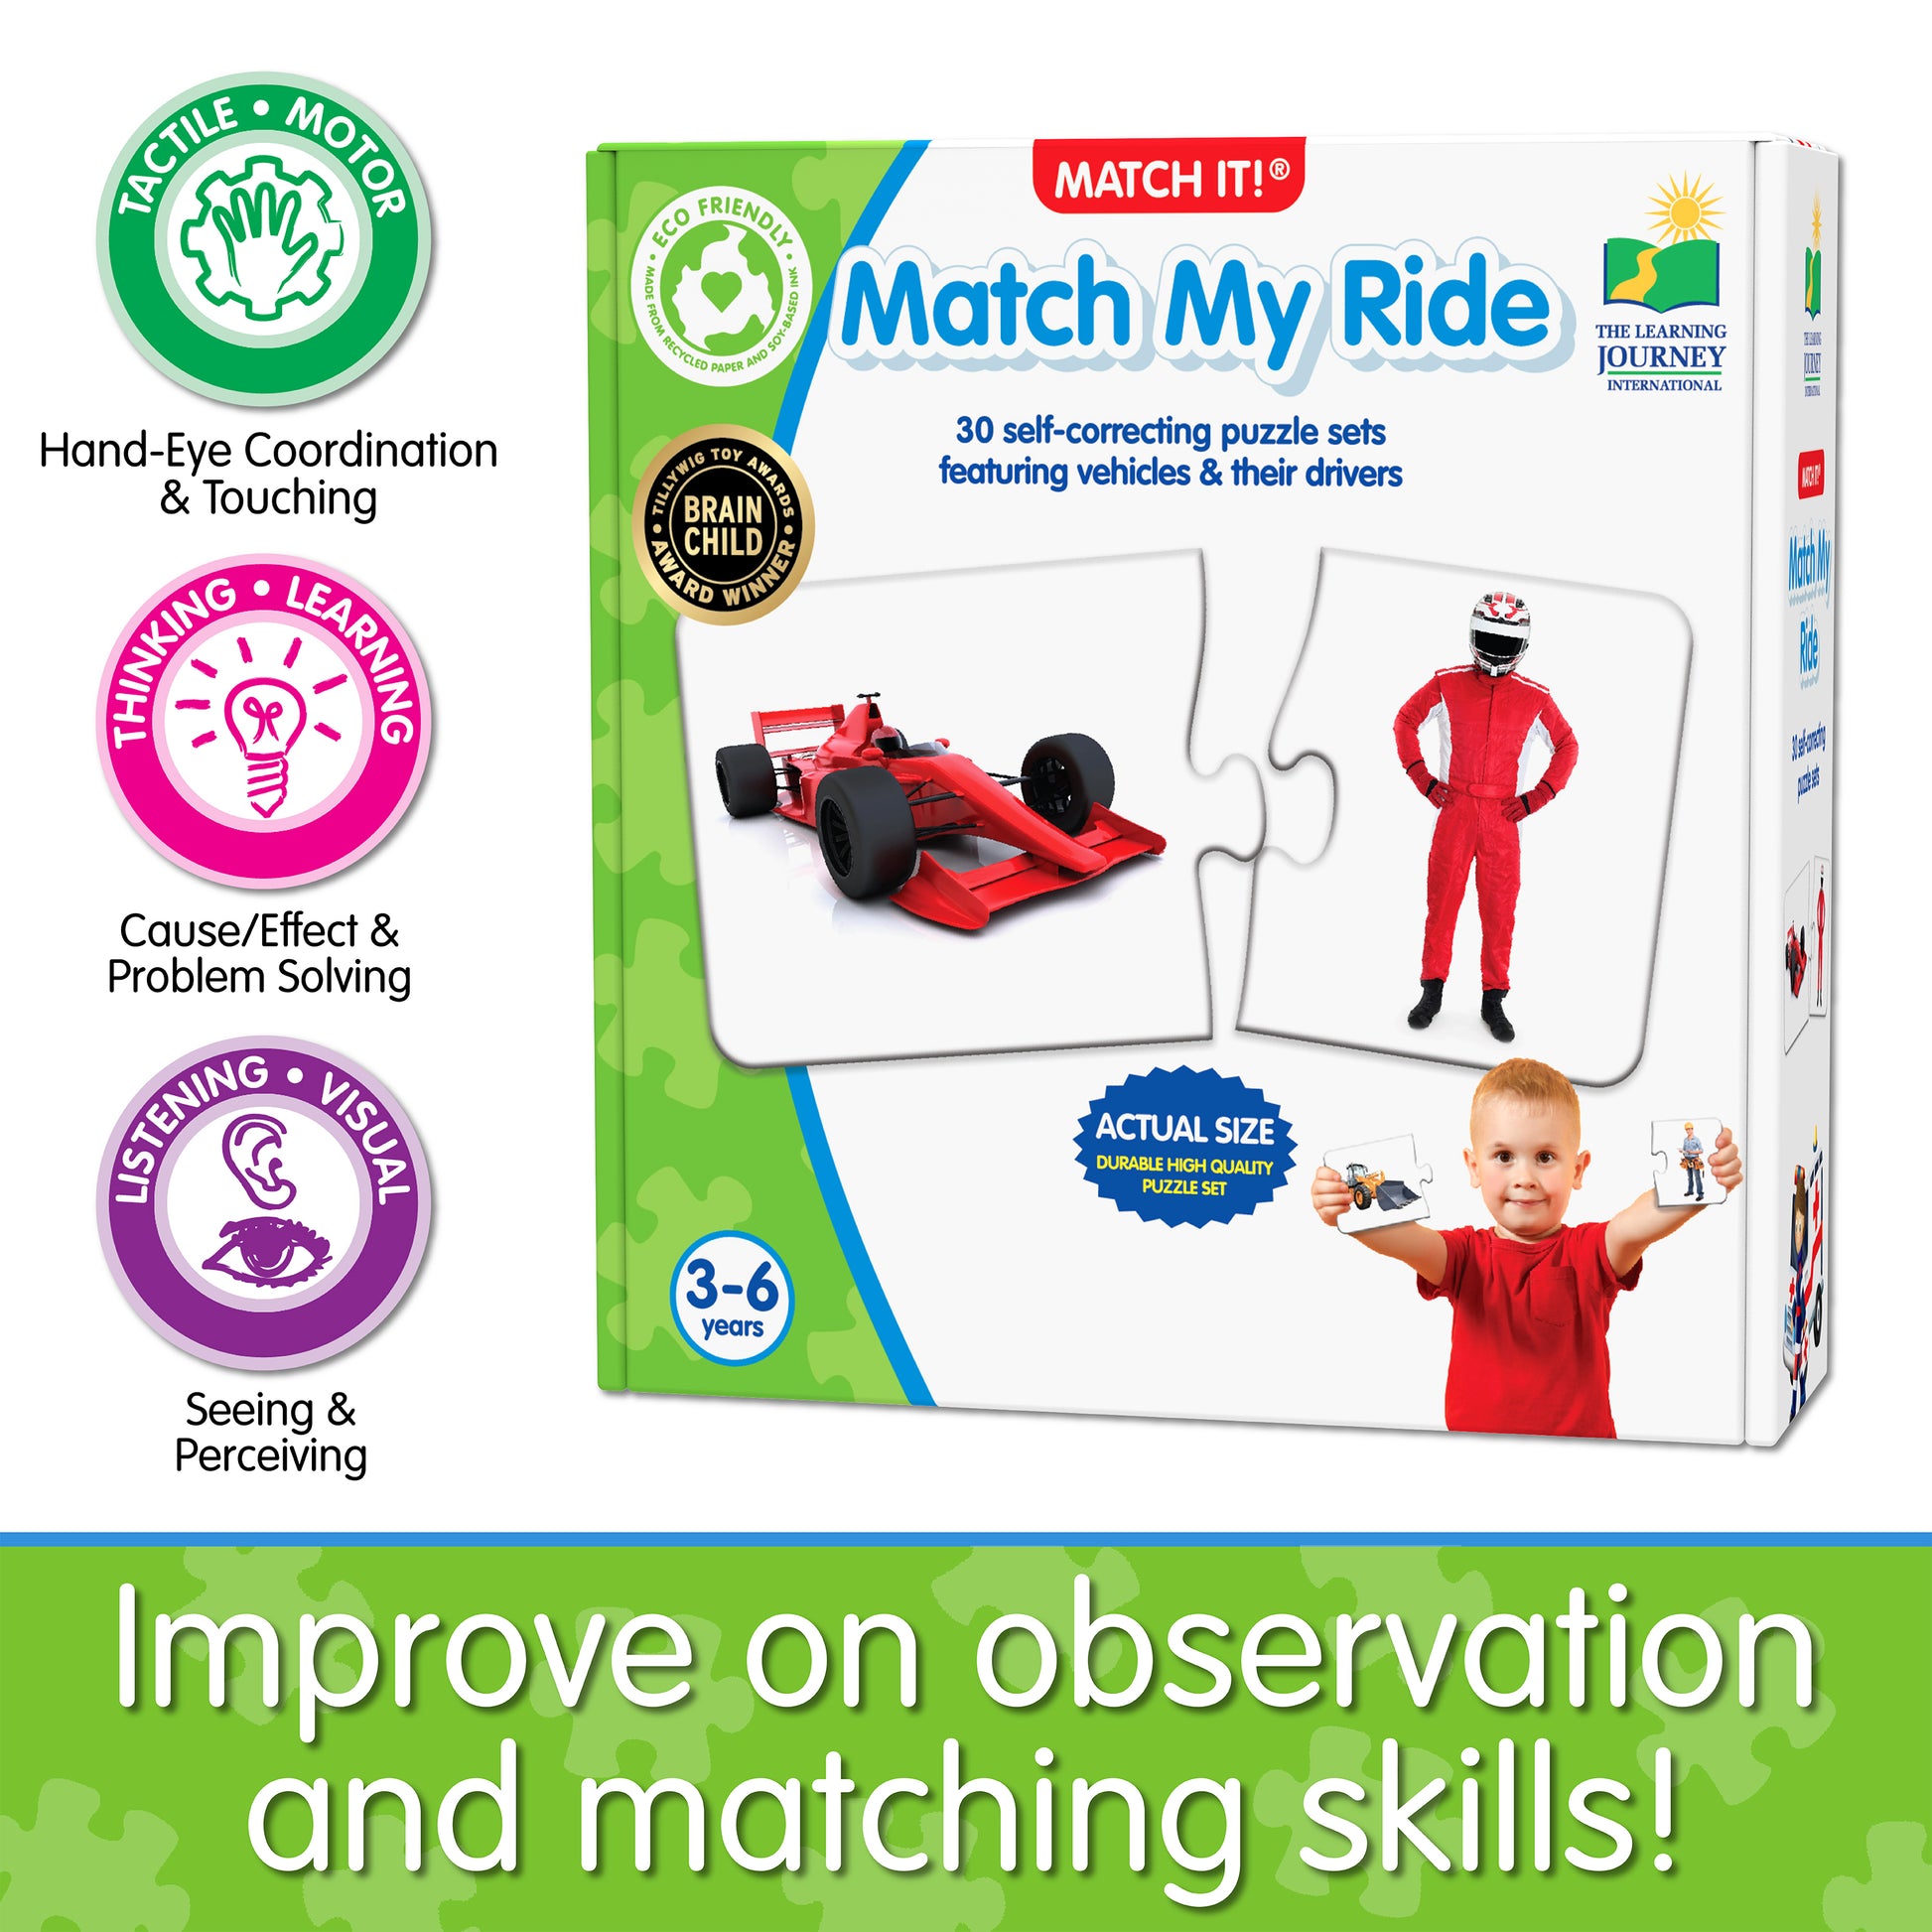 Infographic about Match It - Match My Ride's educational benefits that says, "Improve on observation and matching skills!"